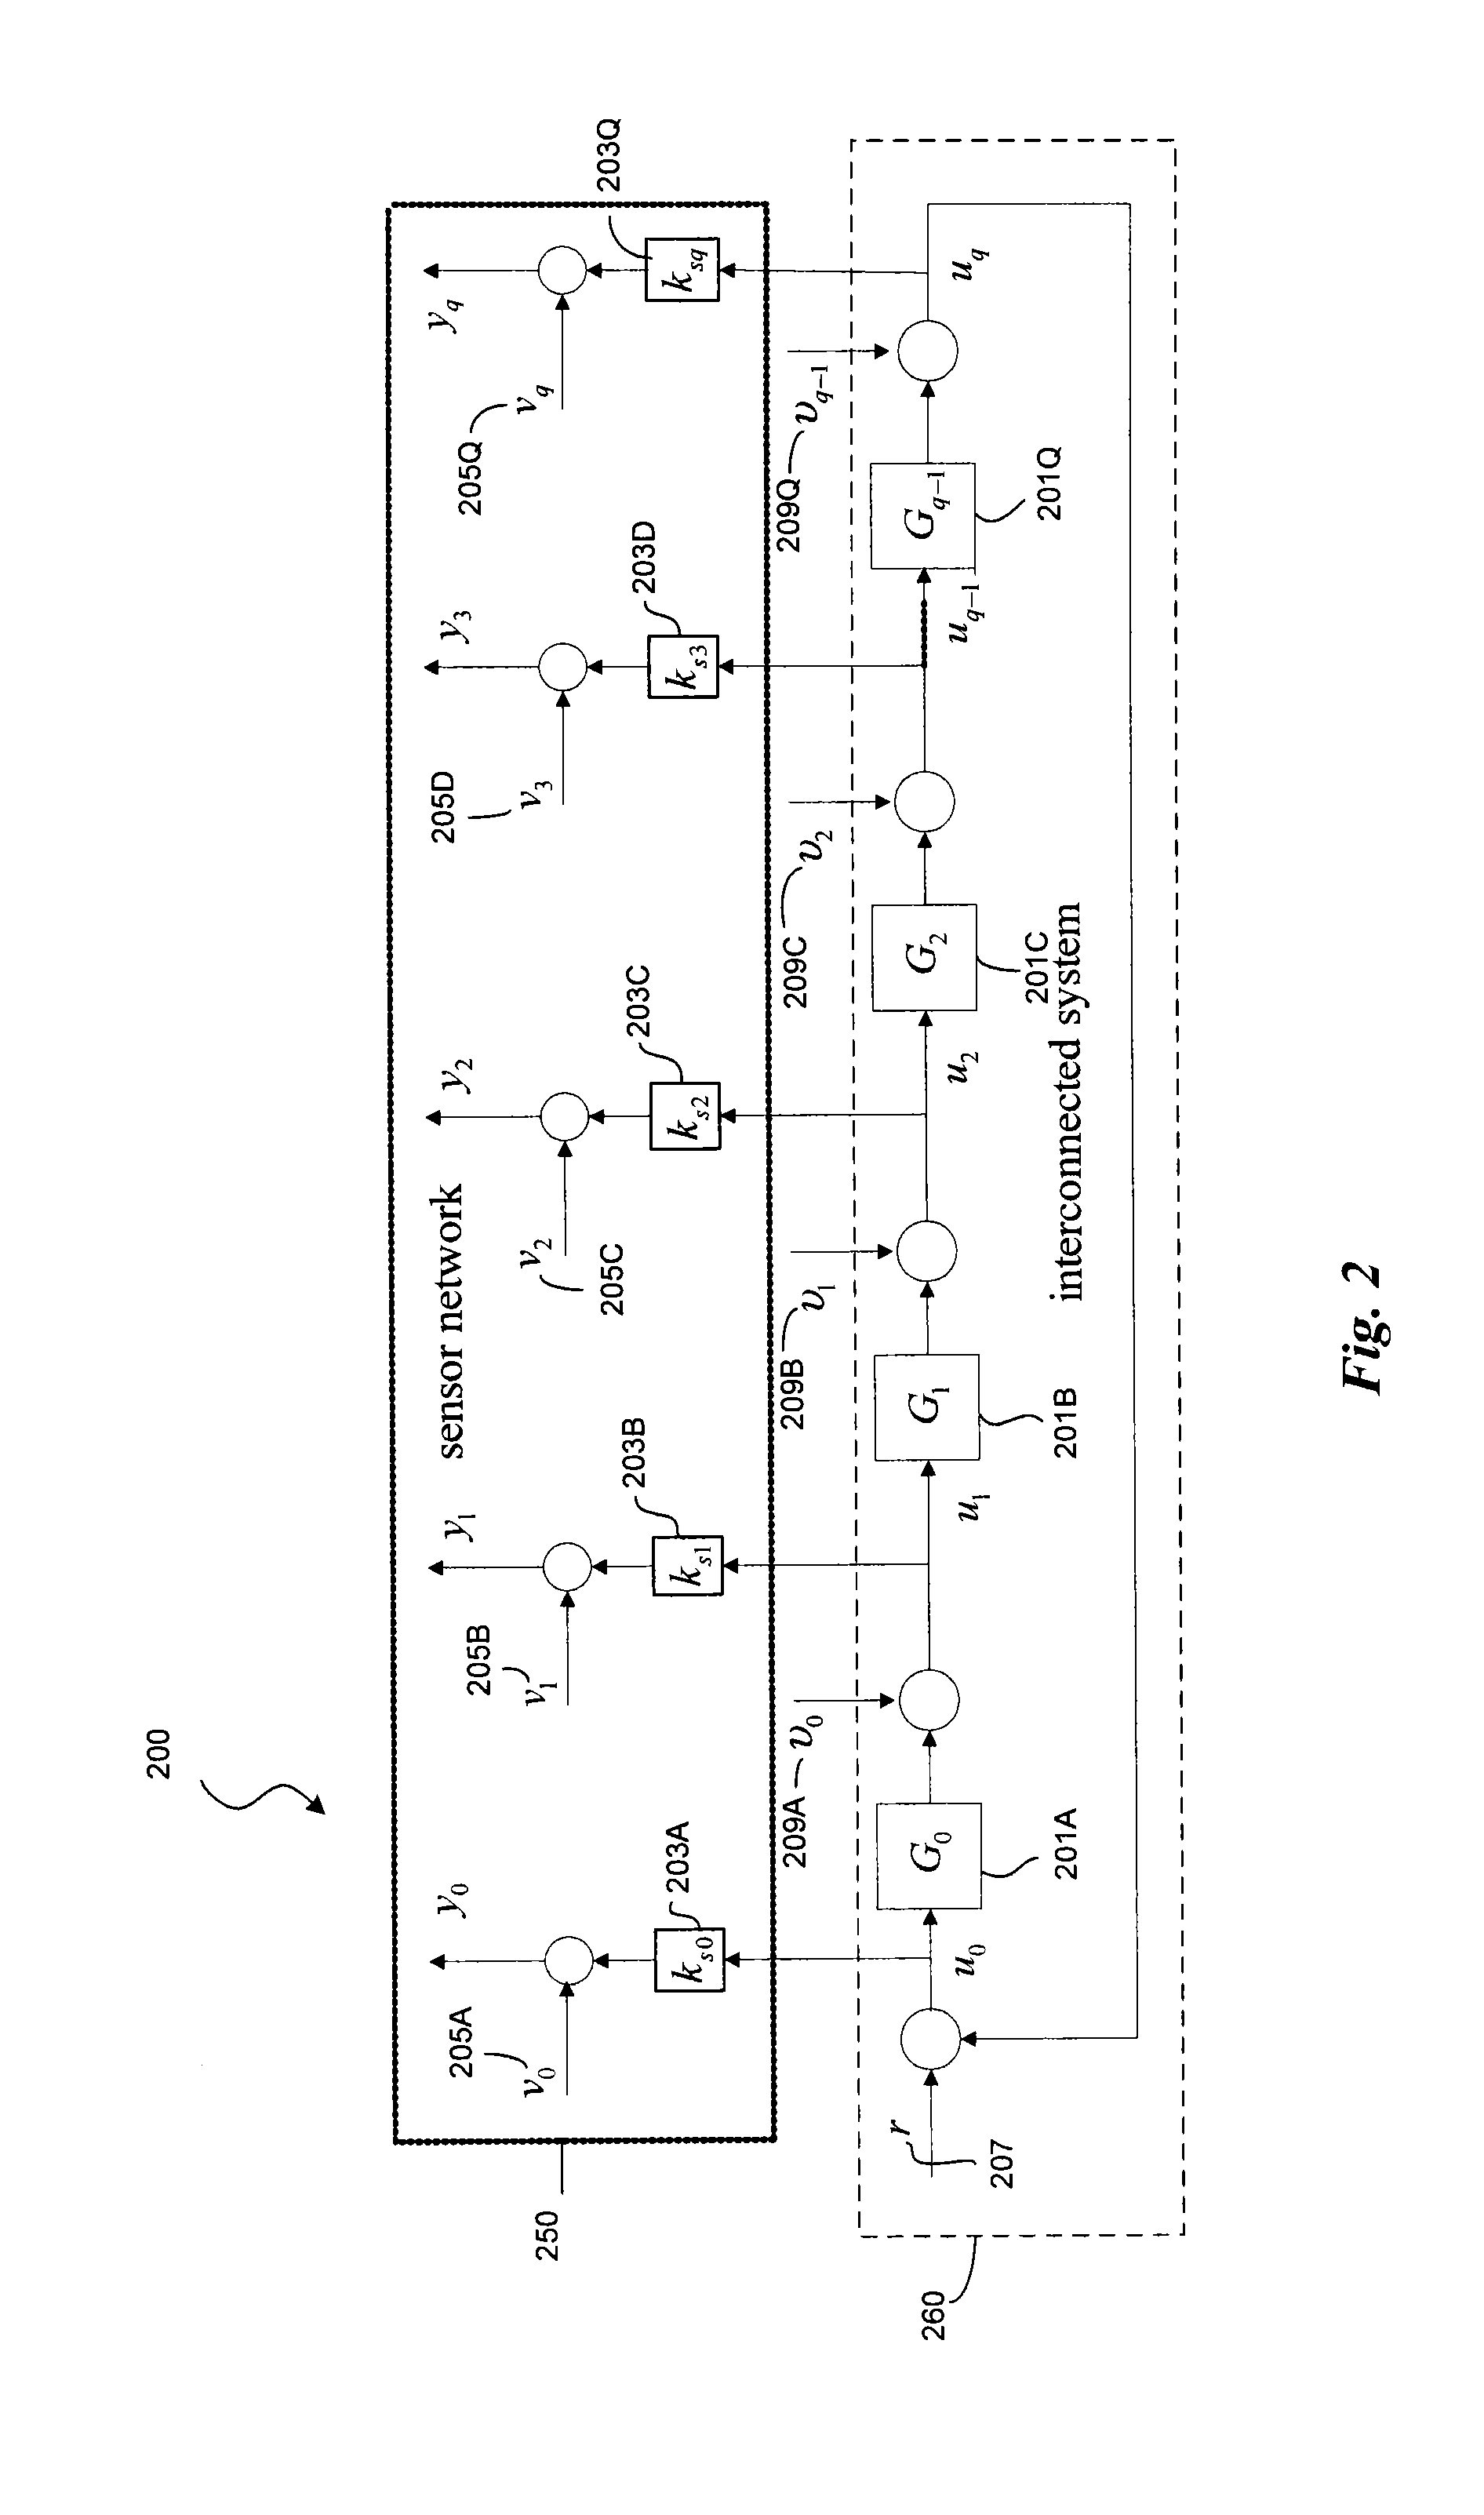 Distributed filtering method for fault diagnosis in a sensor network